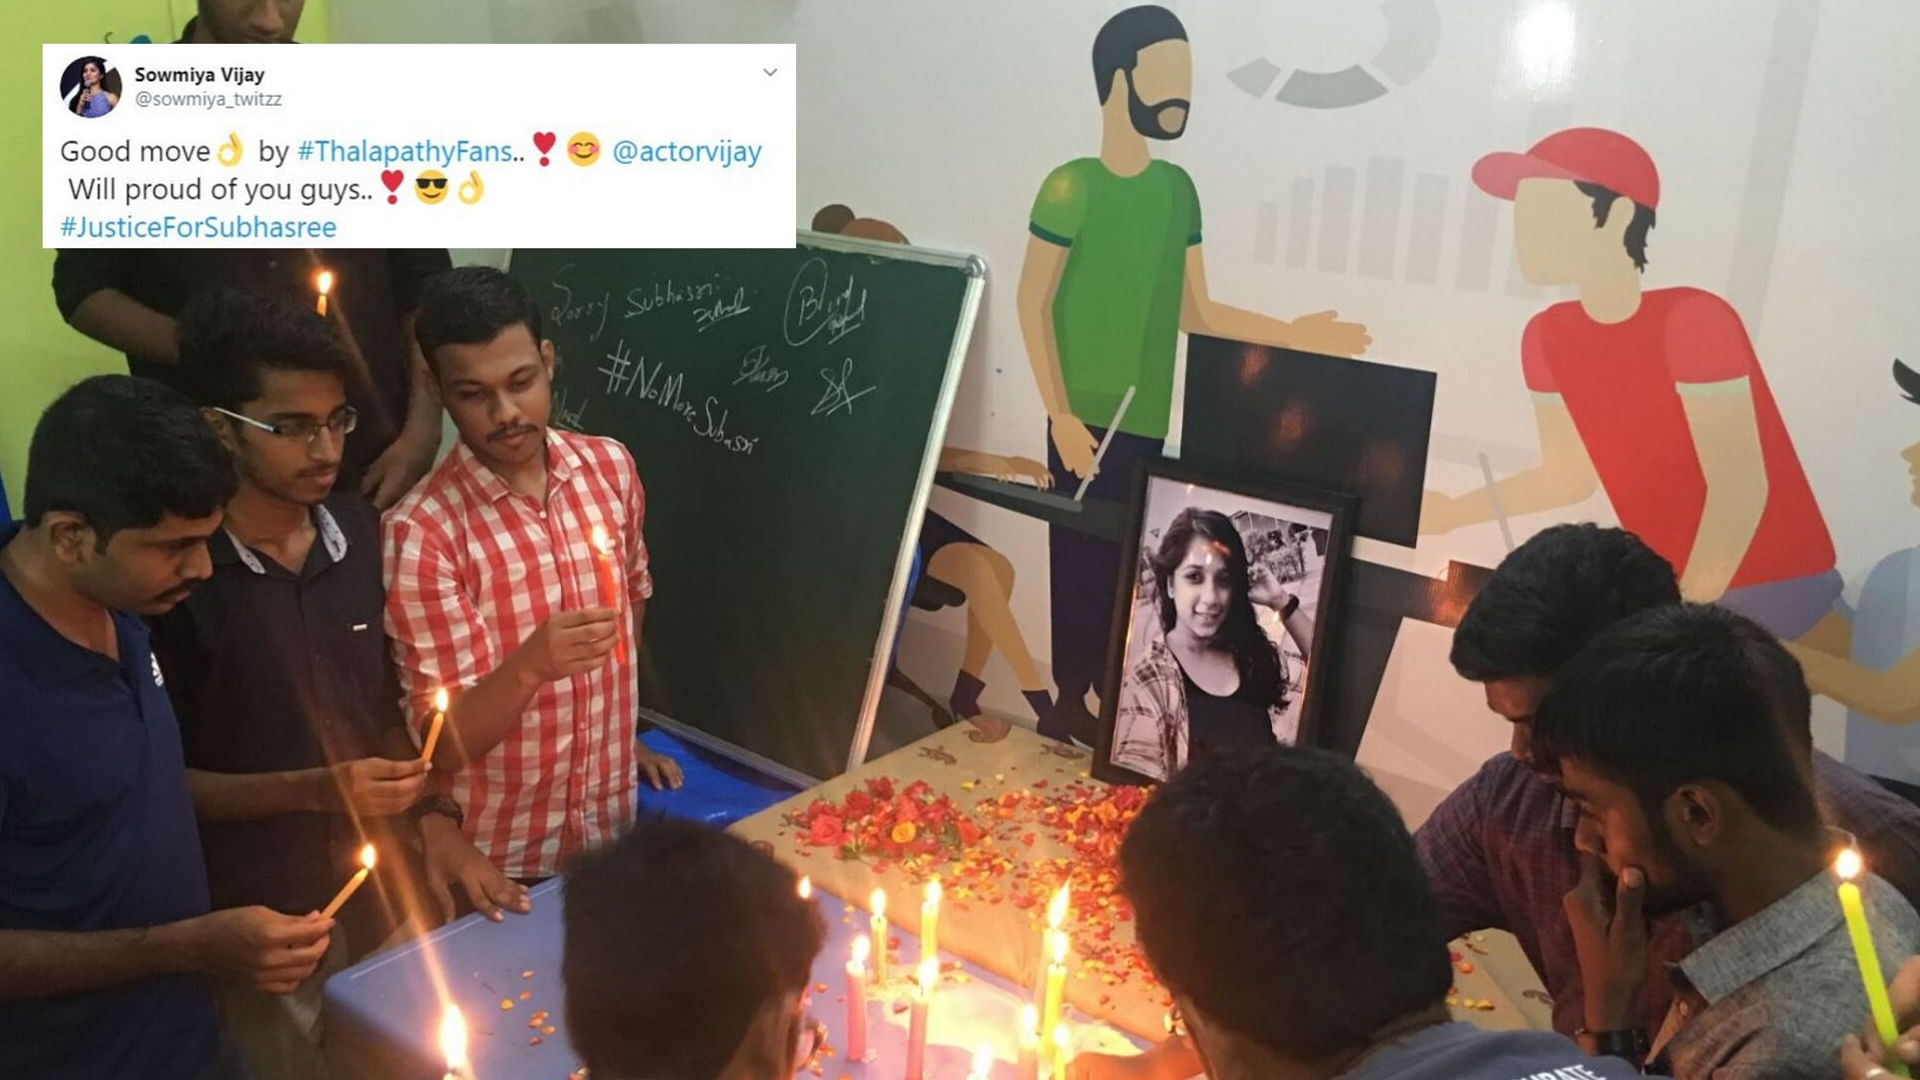 Twitter abuzz with hashtag #JusticeforSubhasree after Kamal Haasan and actor Vijay condemn 22-year-old’s death.